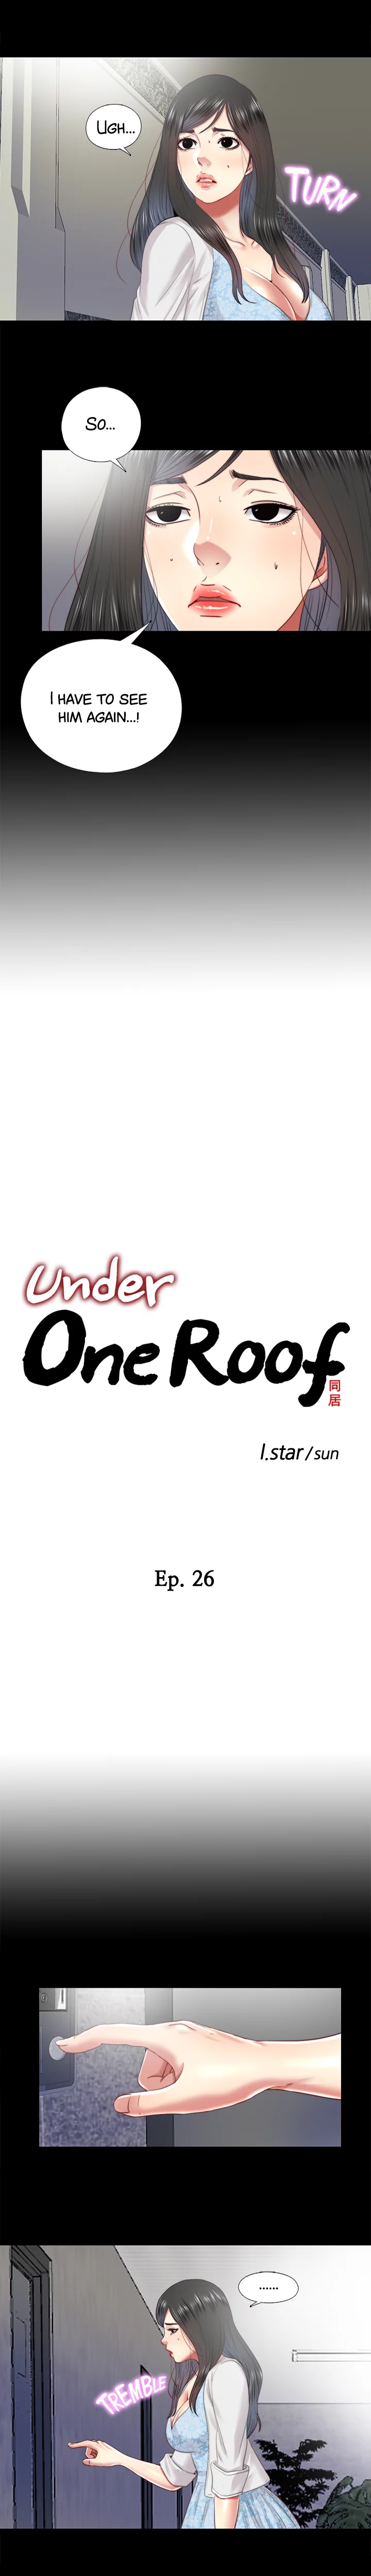 Under One Roof image